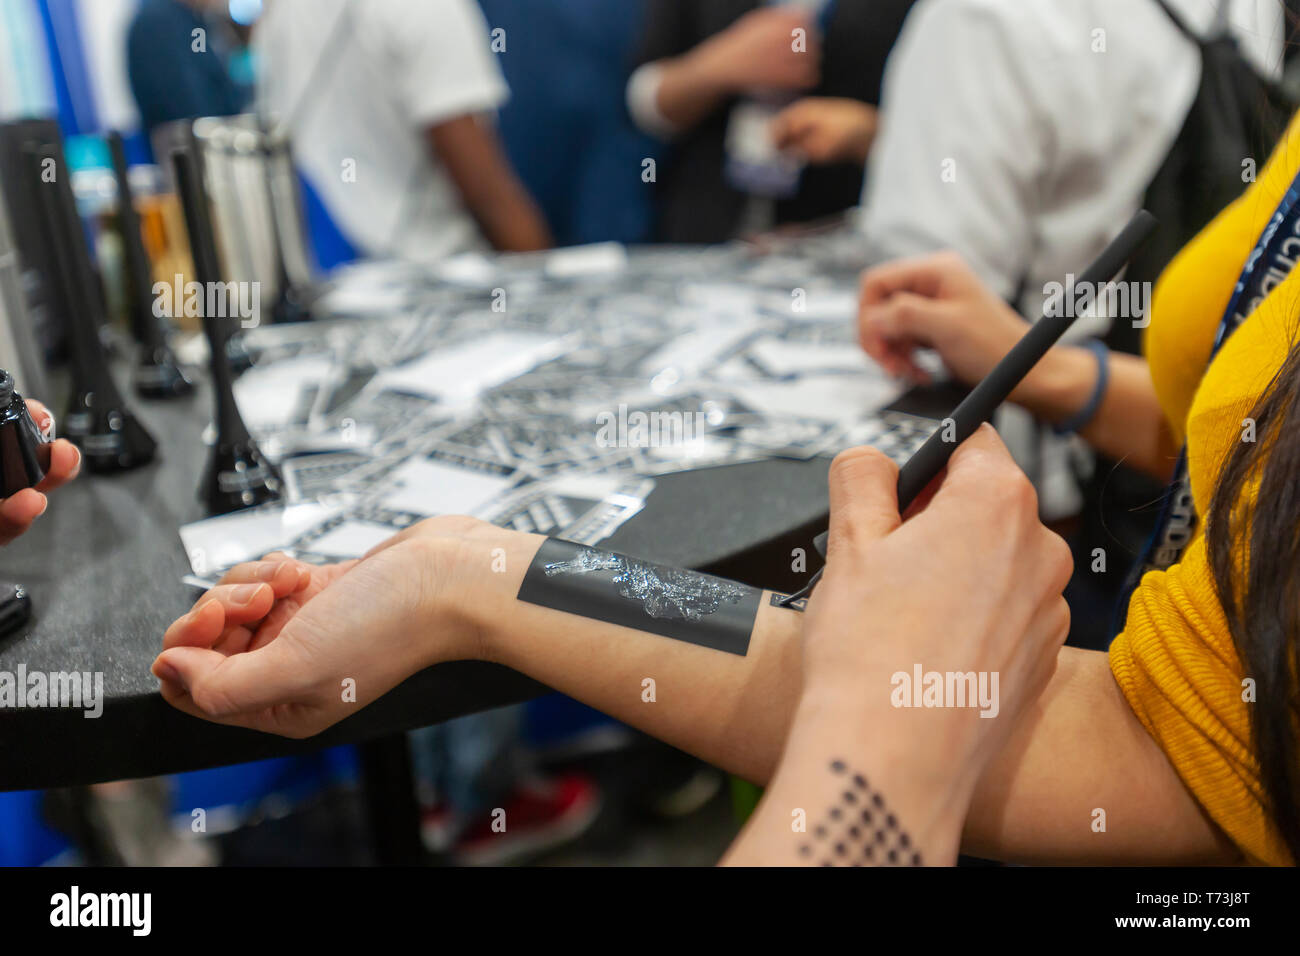 Representatives from Amkiri apply temporary tattoo stencils with fragrances at the TechDay New York event on Thursday, May 2, 2019. Thousands attended to seek jobs with the startups and to network with their peers, and perhaps to find the next big startup. TechDay bills itself as the U.S.'s largest startup event with over 350 exhibitors and over 20,000 attendees. (Â© Richard B. Levine) Stock Photo